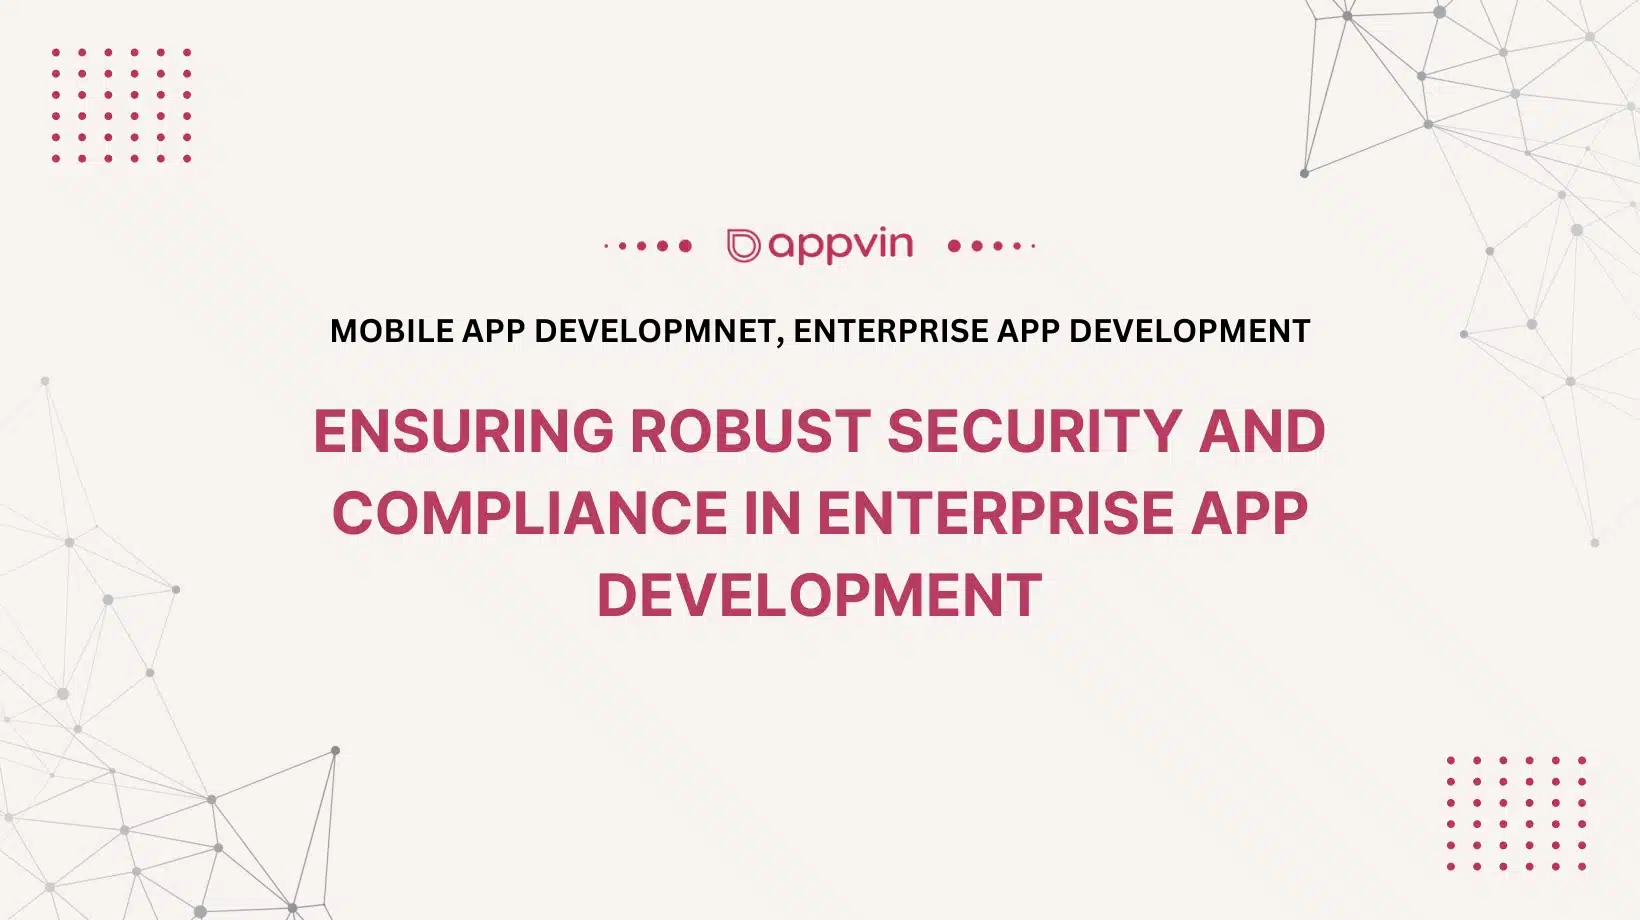 Ensuring Robust Security and Compliance in Enterprise App Development